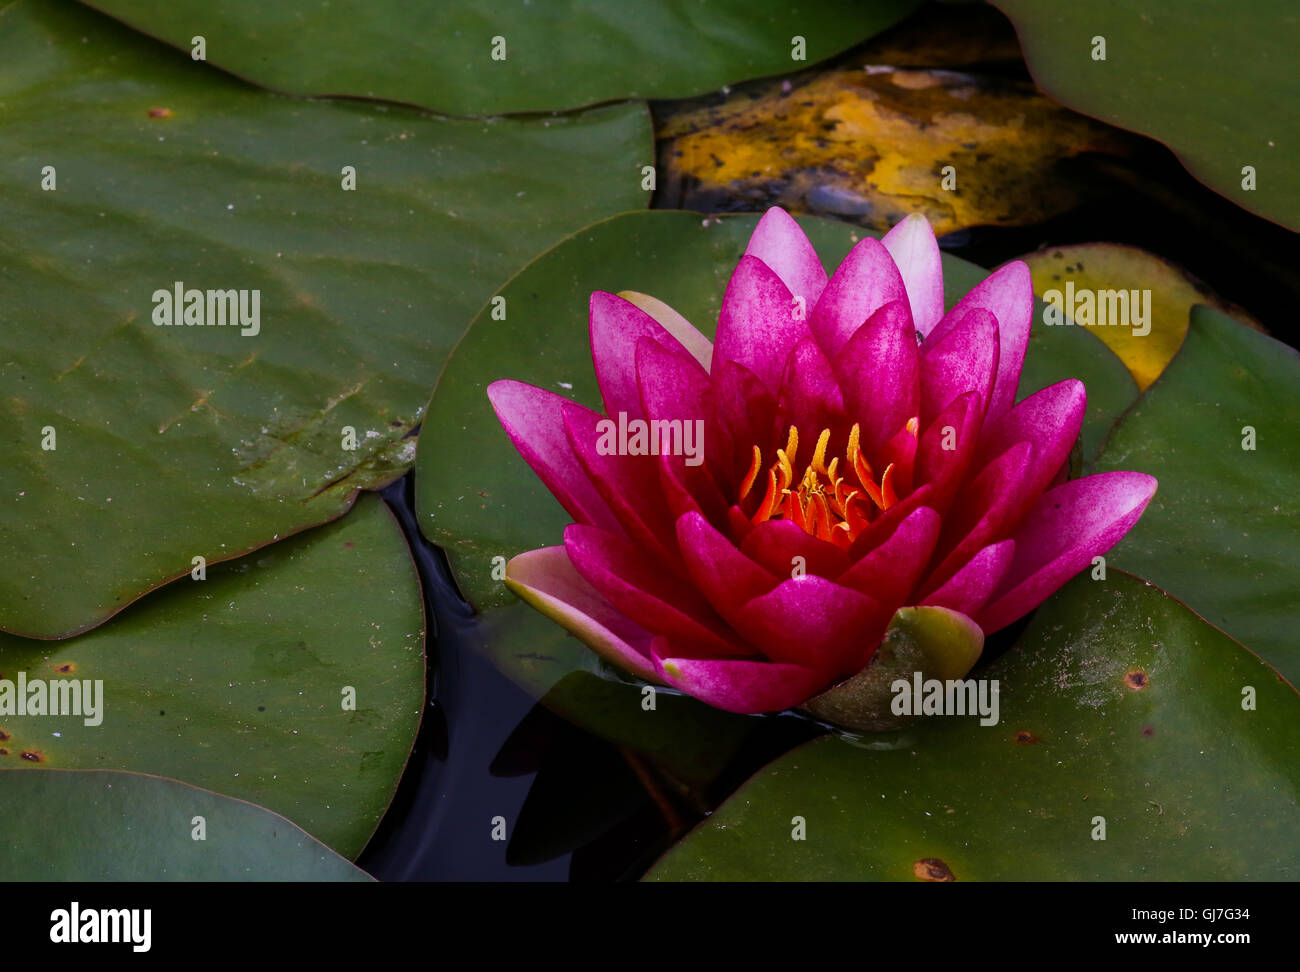 Red water lily lotus flower and Green Leaves in the pond Stock Photo